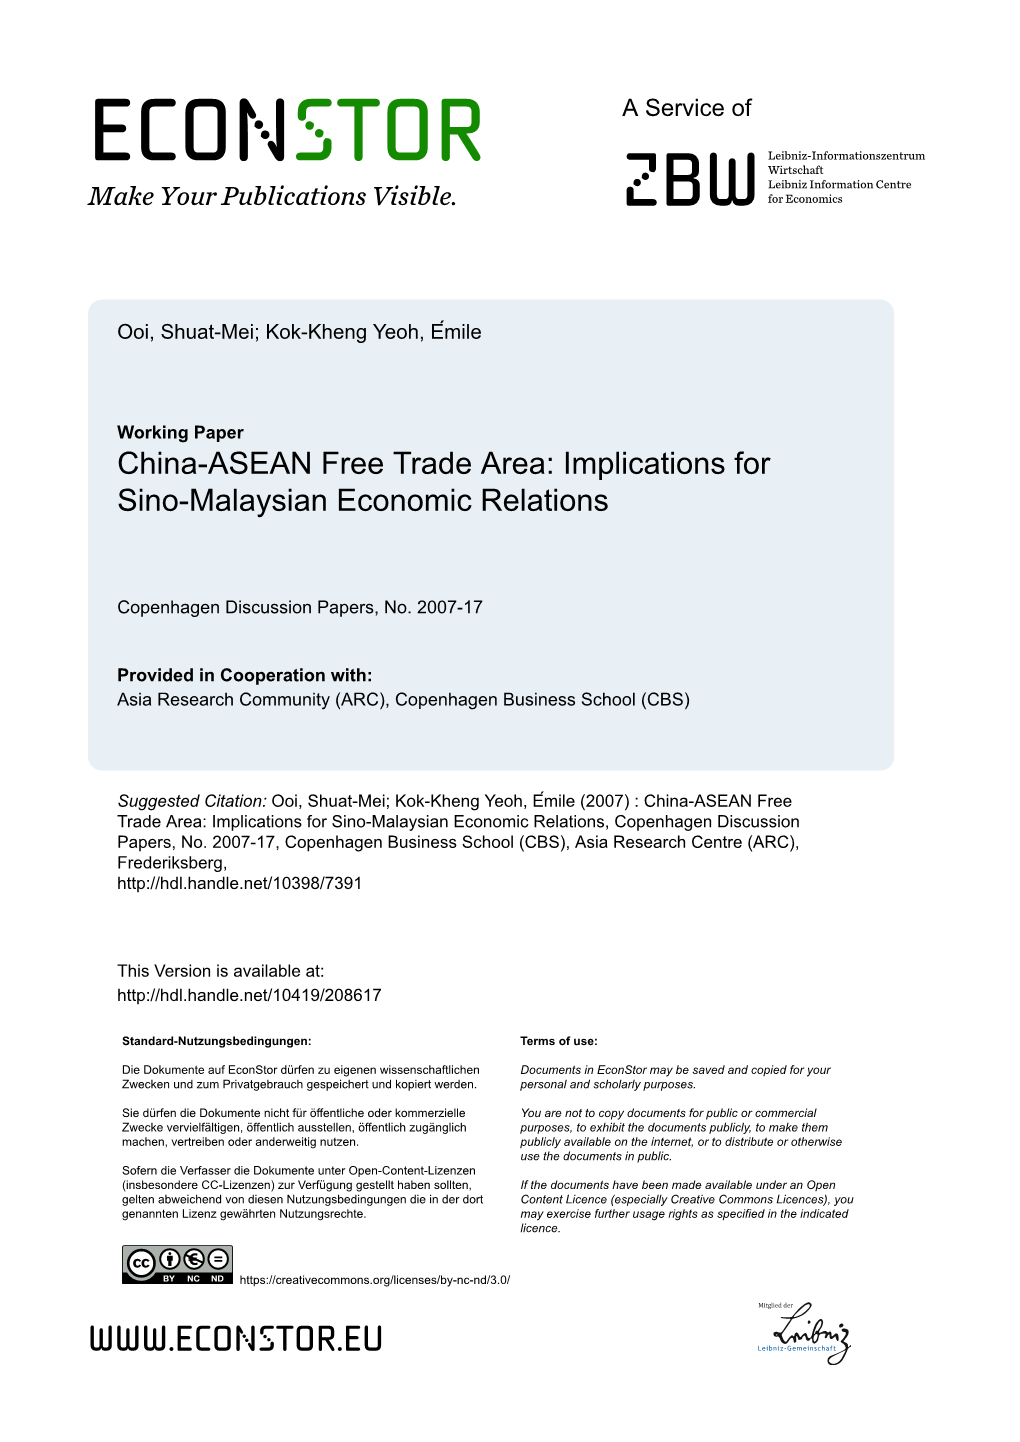 China-ASEAN Free Trade Area: Implications for Sino-Malaysian Economic Relations